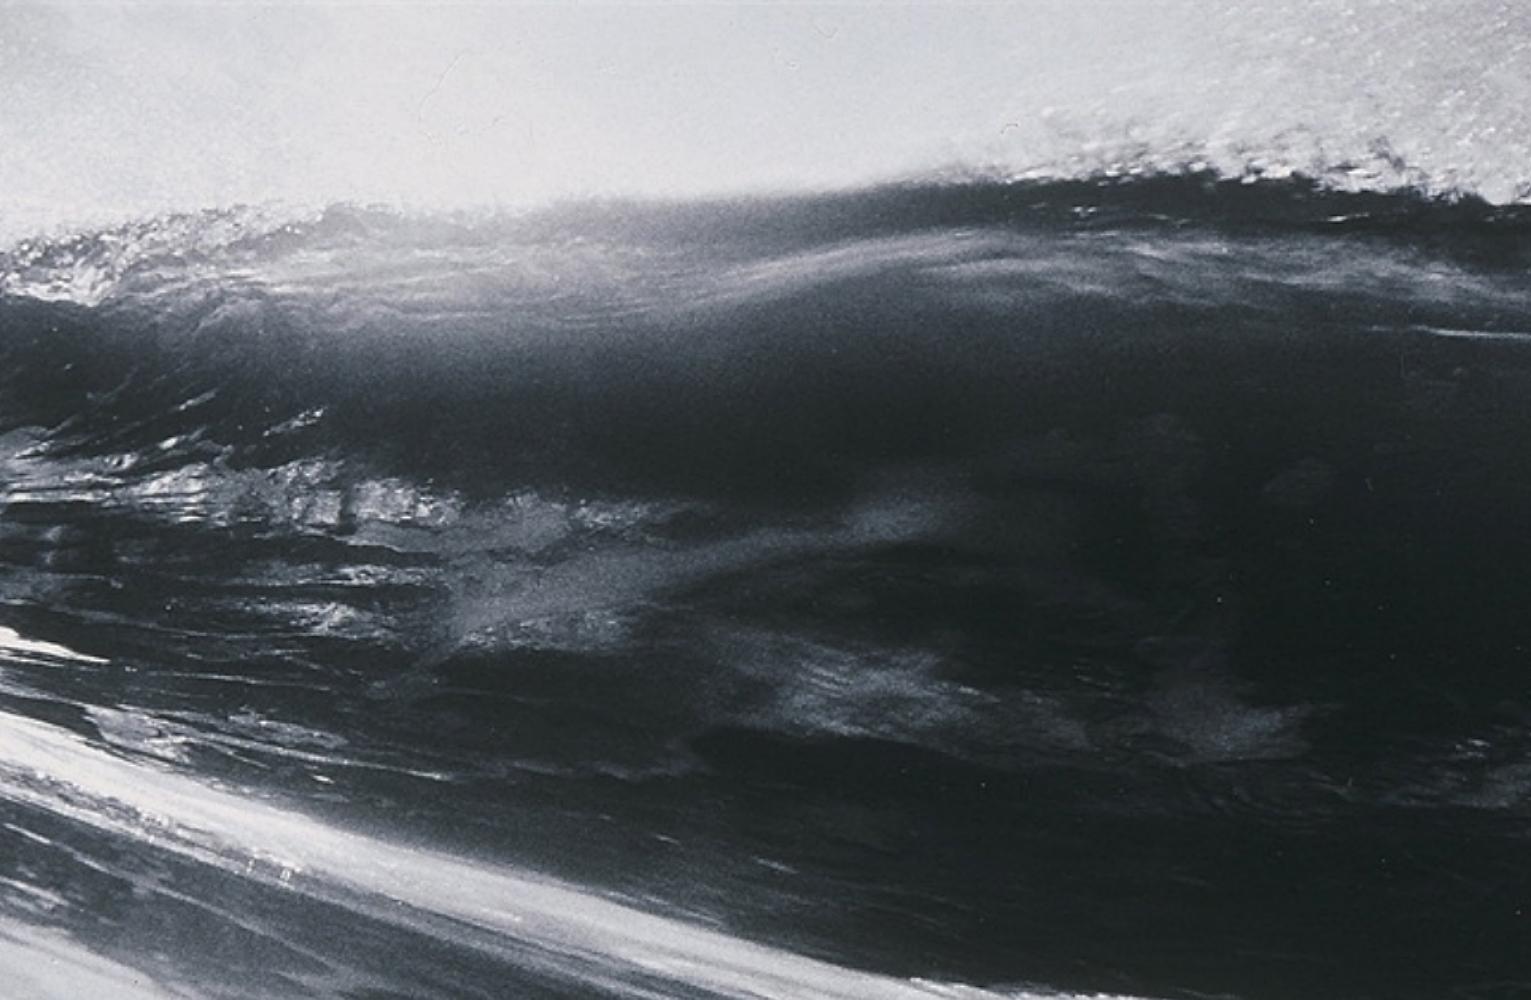 Anthony FRIEDKIN (*1949, America)
Shore Break, Zuma Beach, California, U.S.A.  1994
Silver Gelatin Print, later print
40.6 x 50.8 cm (16 x 20 in.)
Edition of 25; Ed. no. 13/25
Print only

Born 1949 in Los Angeles, USA, Friedkin currently lives and